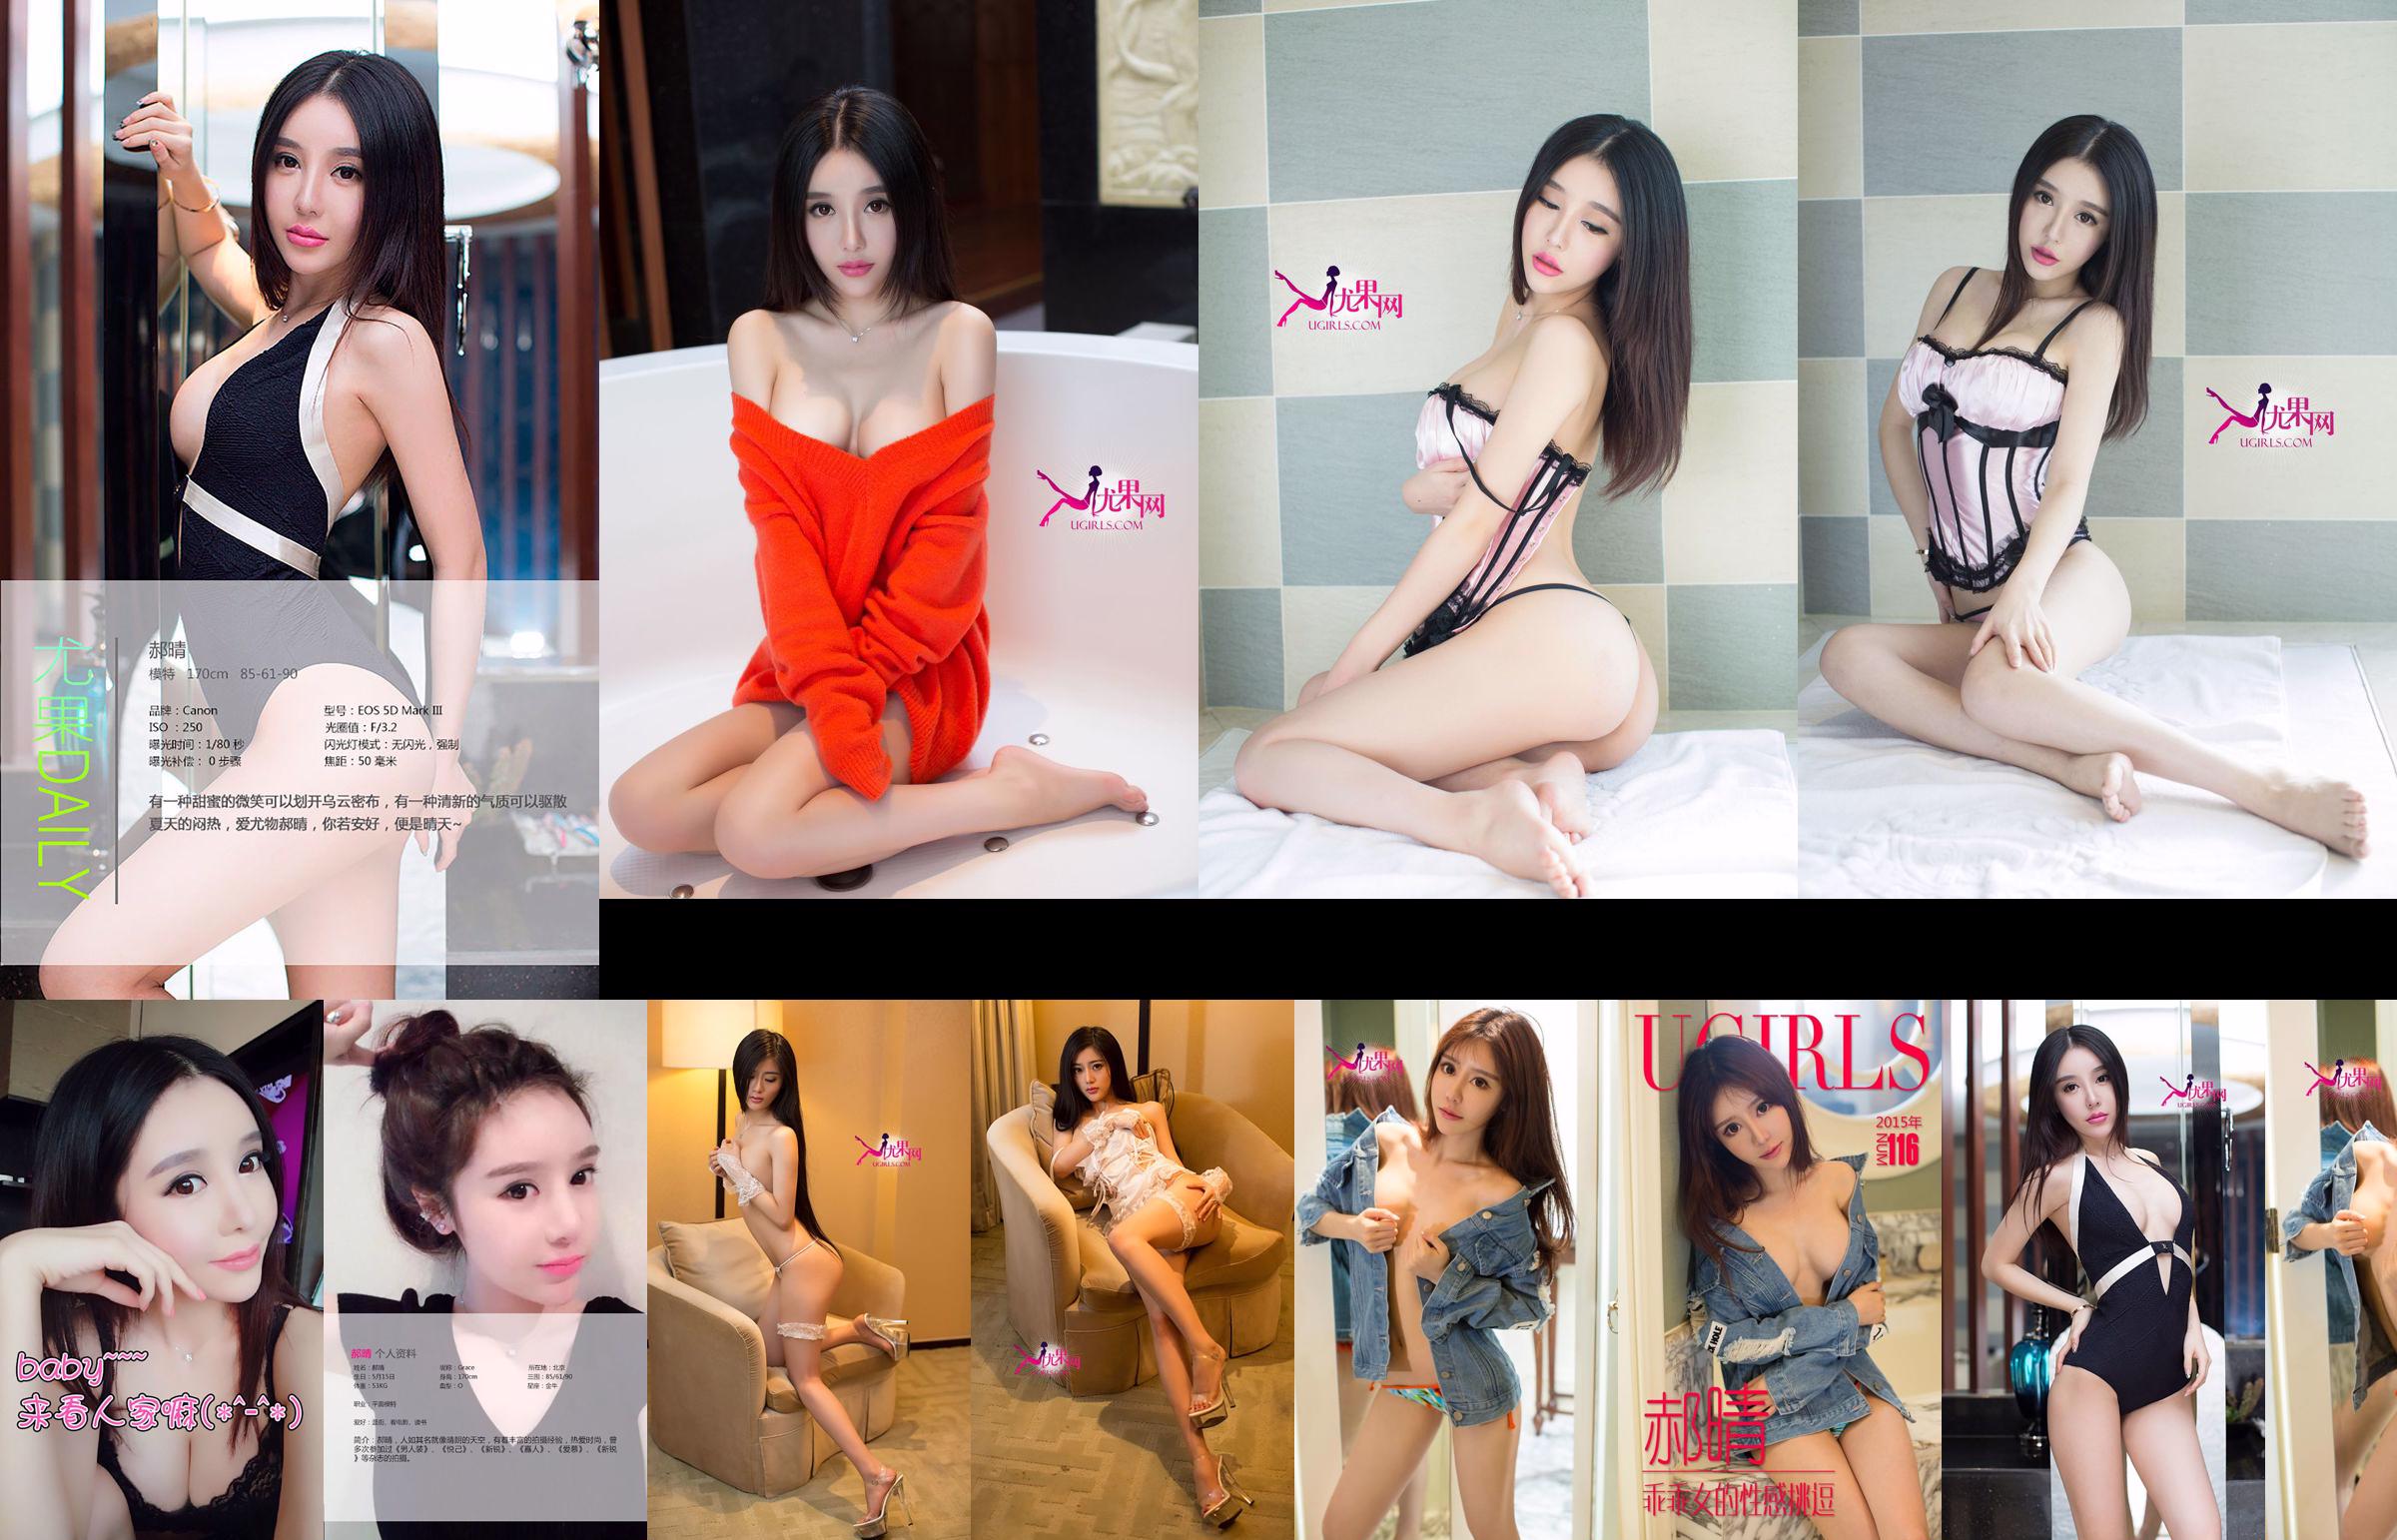 Hao Qing "The Sexy Provocation of a Good Girl" [Ugirls] No.116 No.ecd320 Page 3